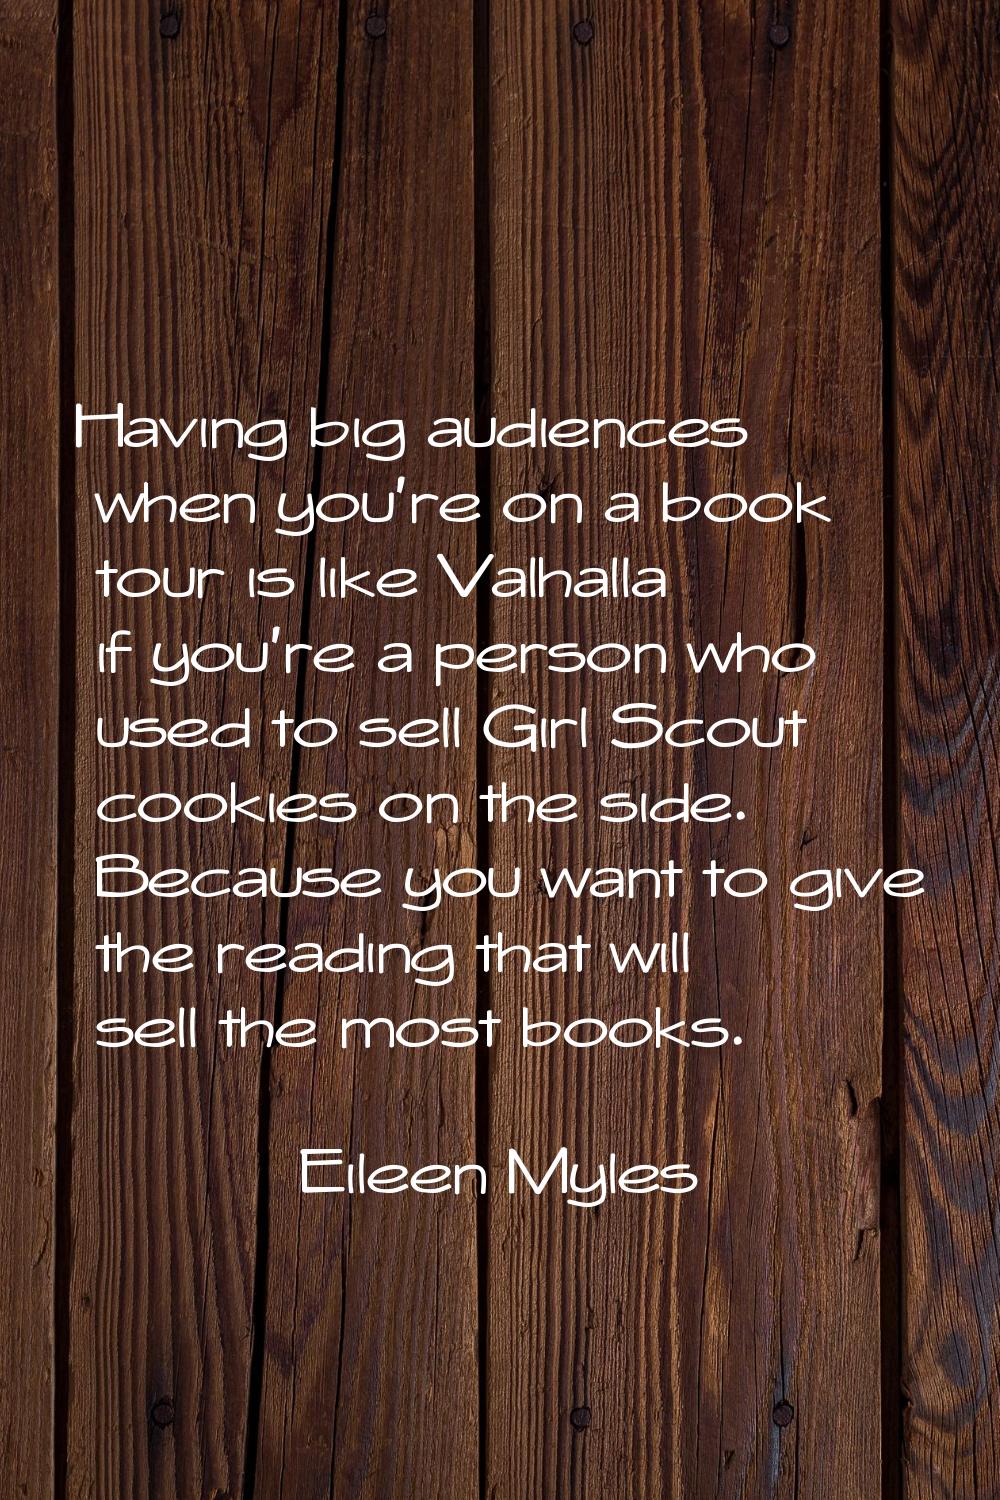 Having big audiences when you're on a book tour is like Valhalla if you're a person who used to sel